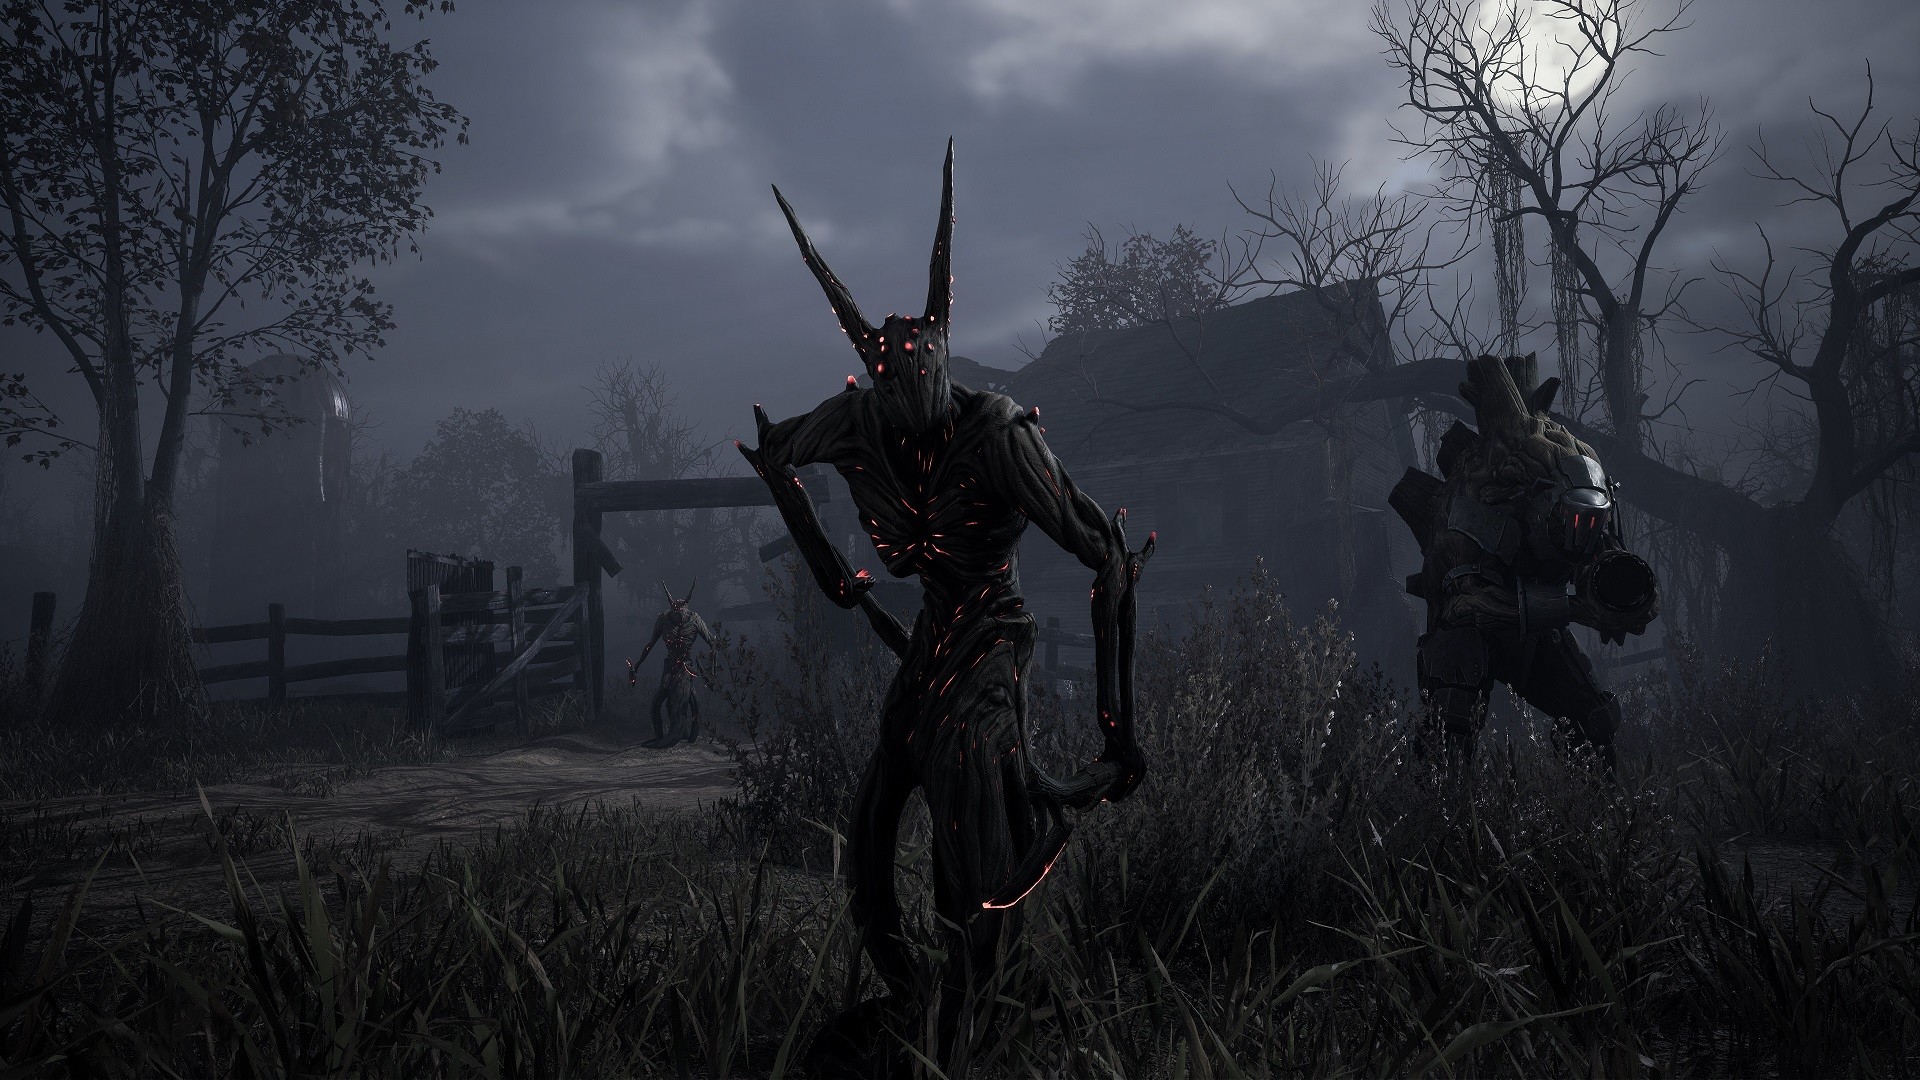 Remnant: From the Ashes - Subject 2923 Featured Screenshot #1